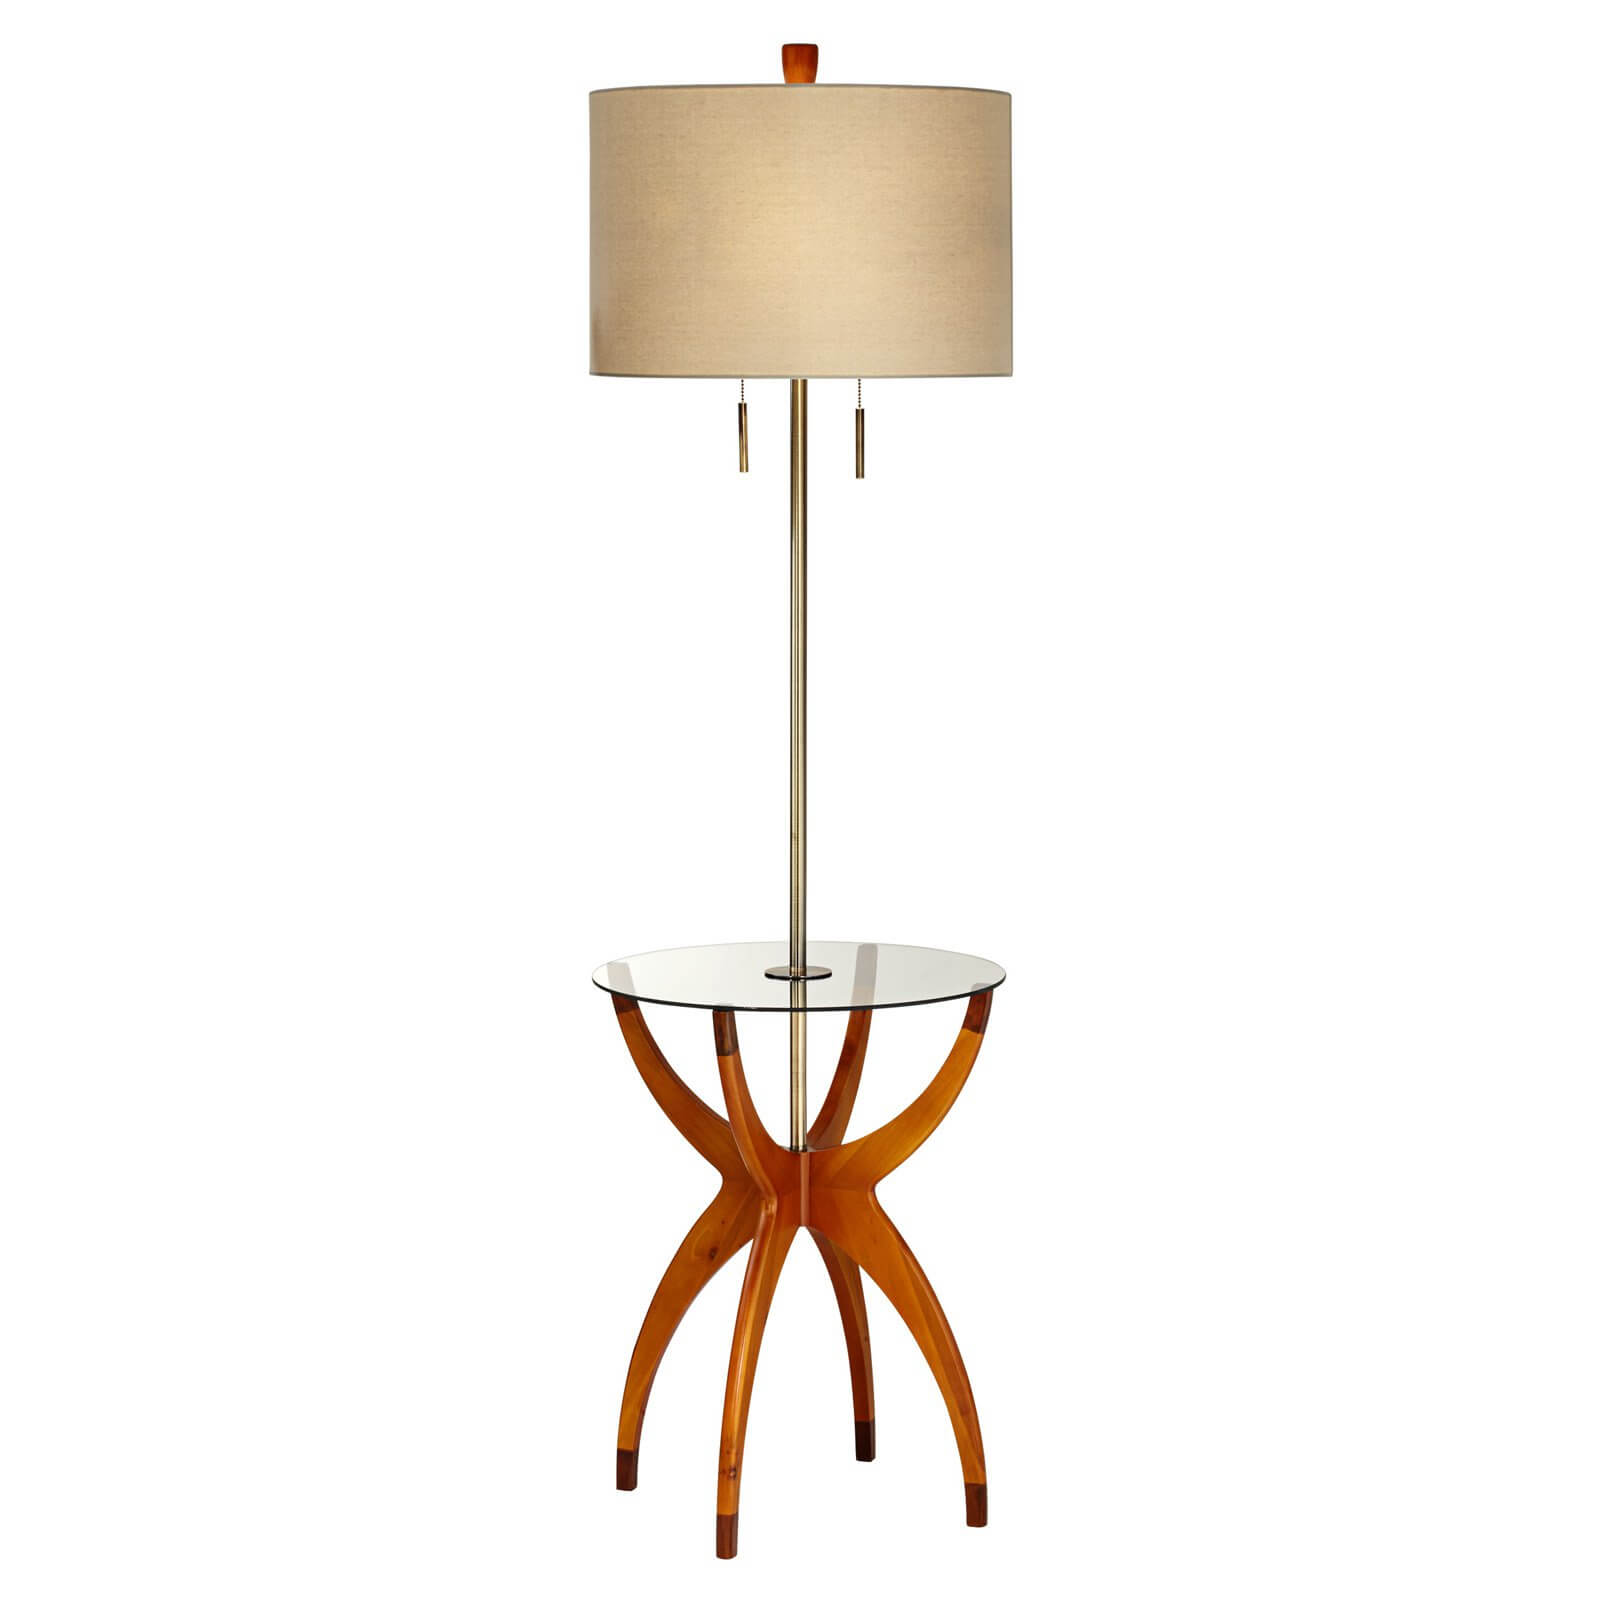 This modern styled example features bright carved natural wood base holding a seamless glass circular tabletop beneath a nickel frame and standard cylinder shade.